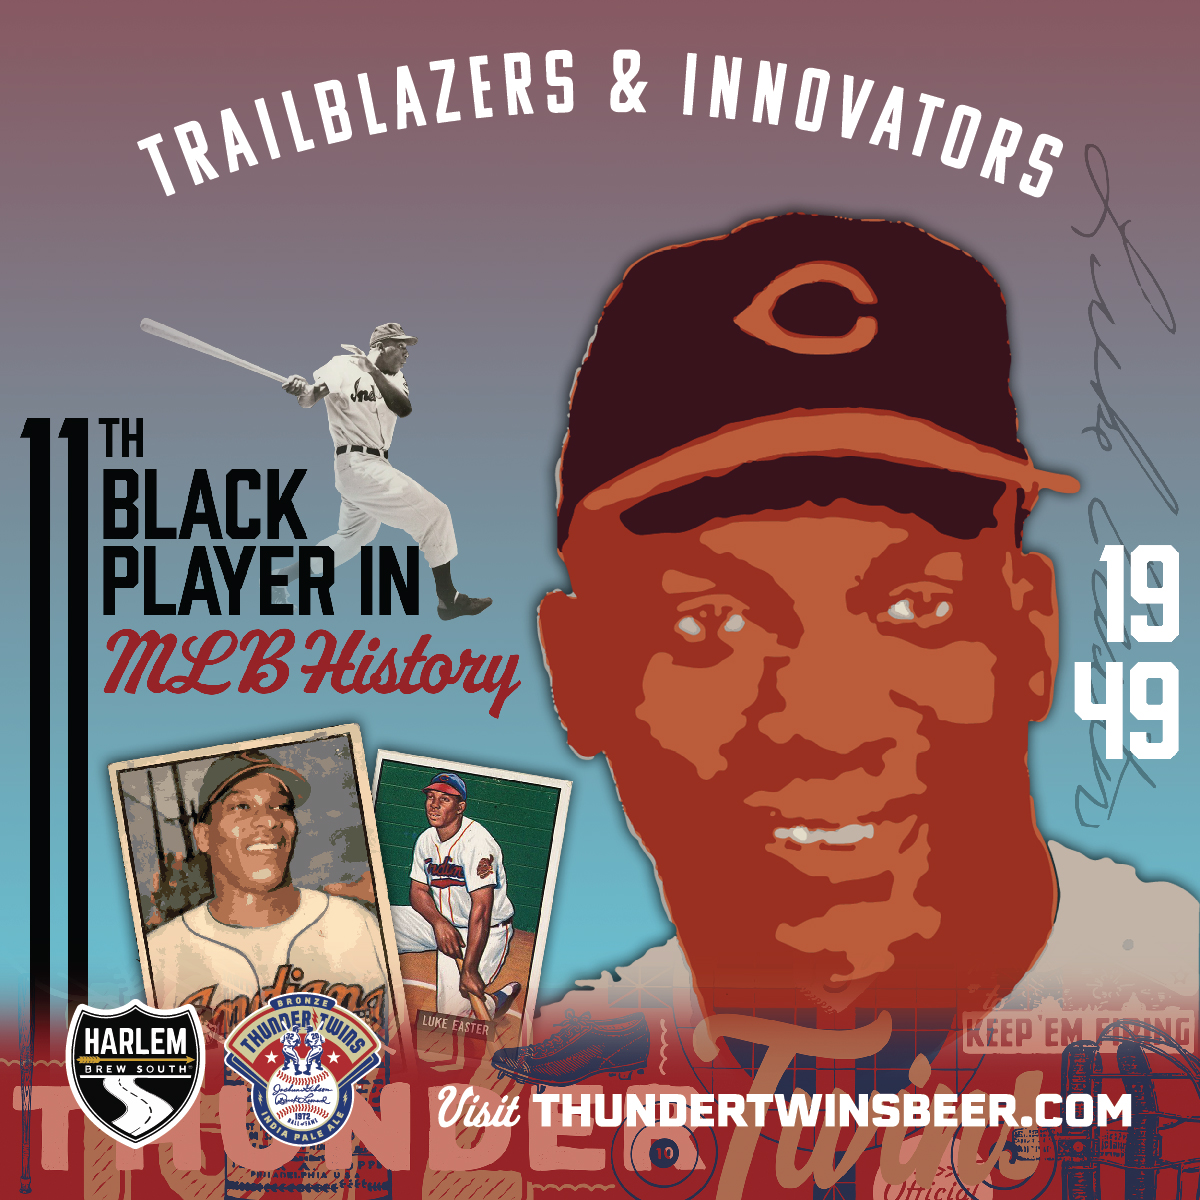 Babe Ruths old roommate Jimmie Reese said Luke Easter was “the only player I ever saw who can hit a baseball as far.” Easter became the 11th Black player in modern @MLB history #OTD in '49.  @cleguardians #NegroLeagues #Trailblazers #thundertwinsbeer @harlembrewing @DanielKearsey